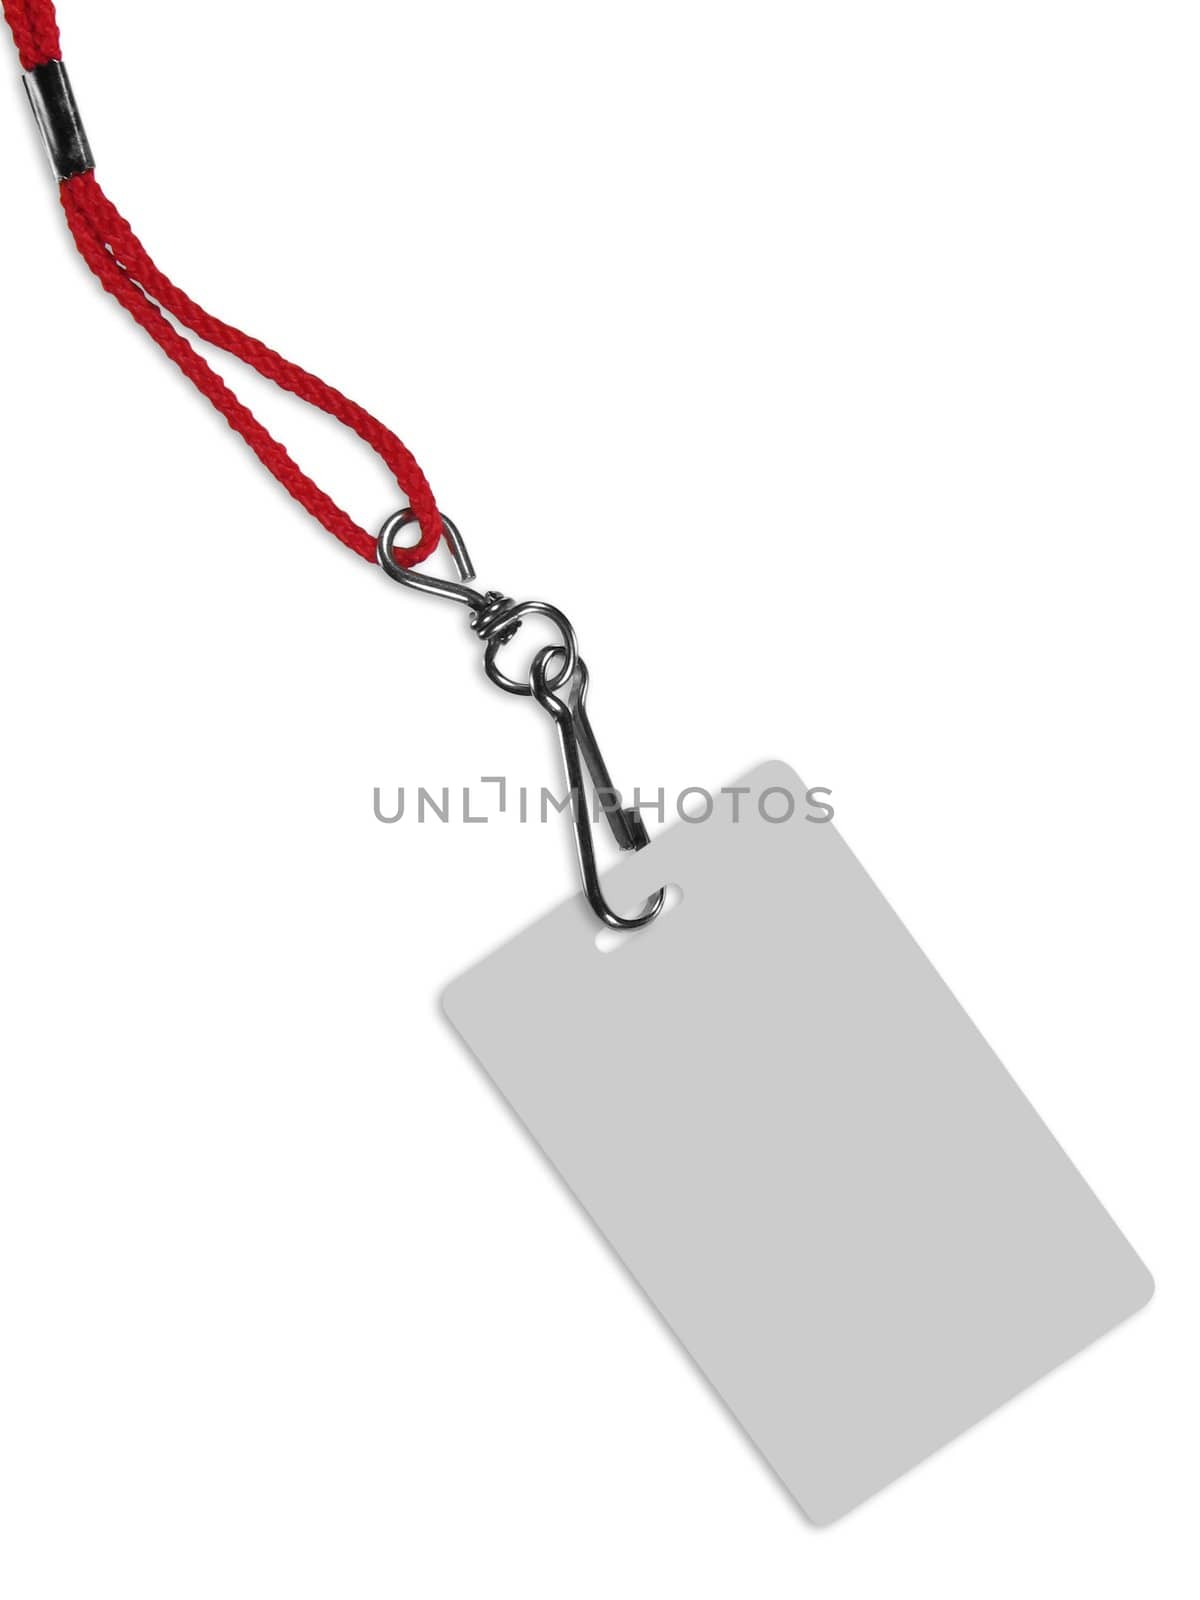 Blank ID card / badge with copy space, isolated on white. Contains clipping path of the card (without neckband) to change the color of the card.